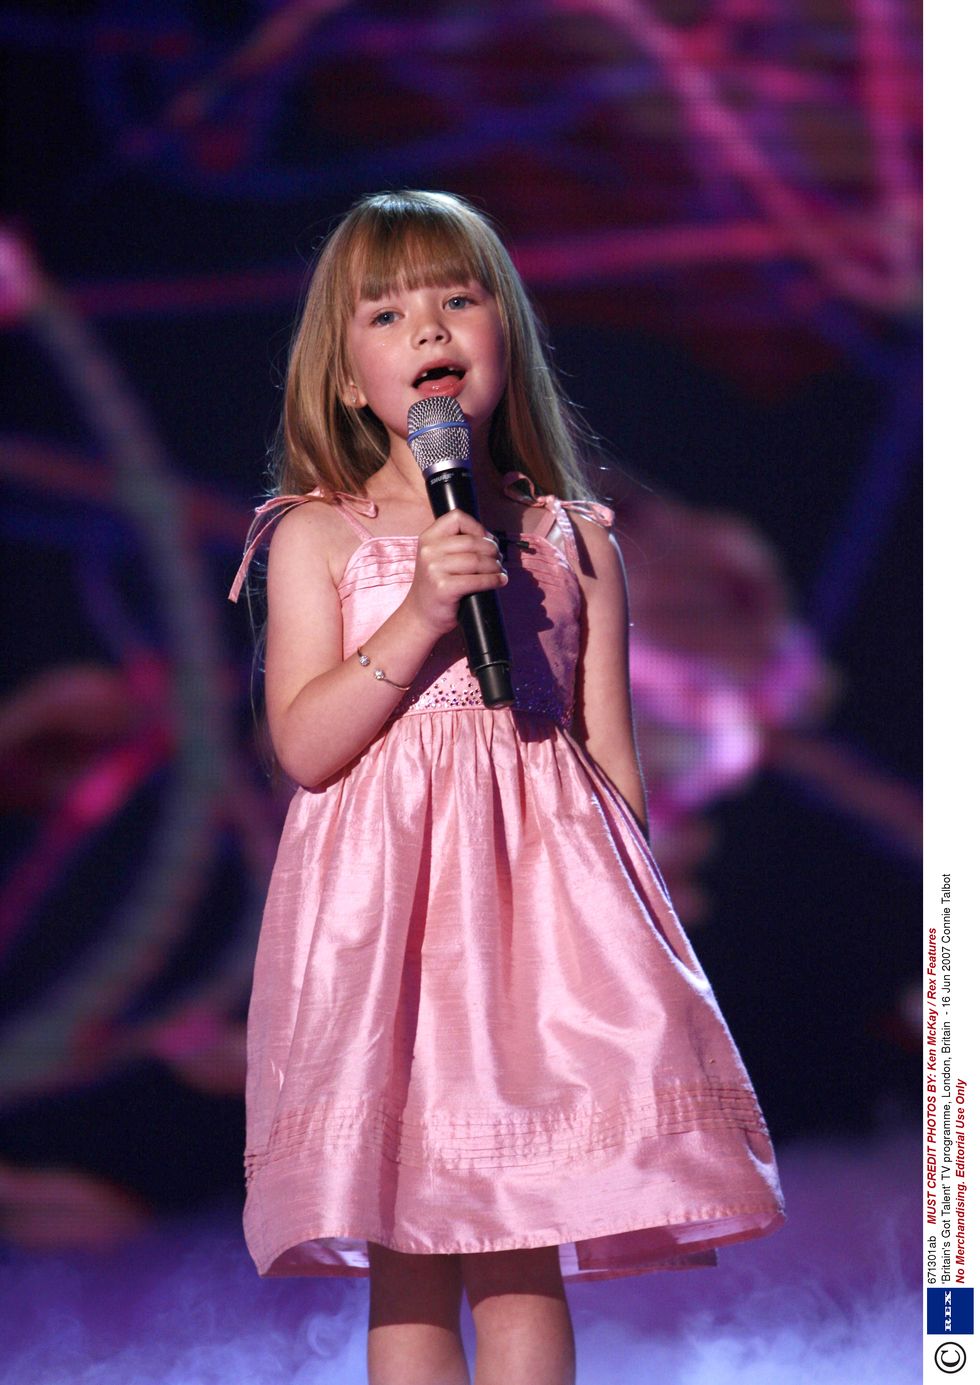 Connie Talbot is Entering a New Era In Her Artisry